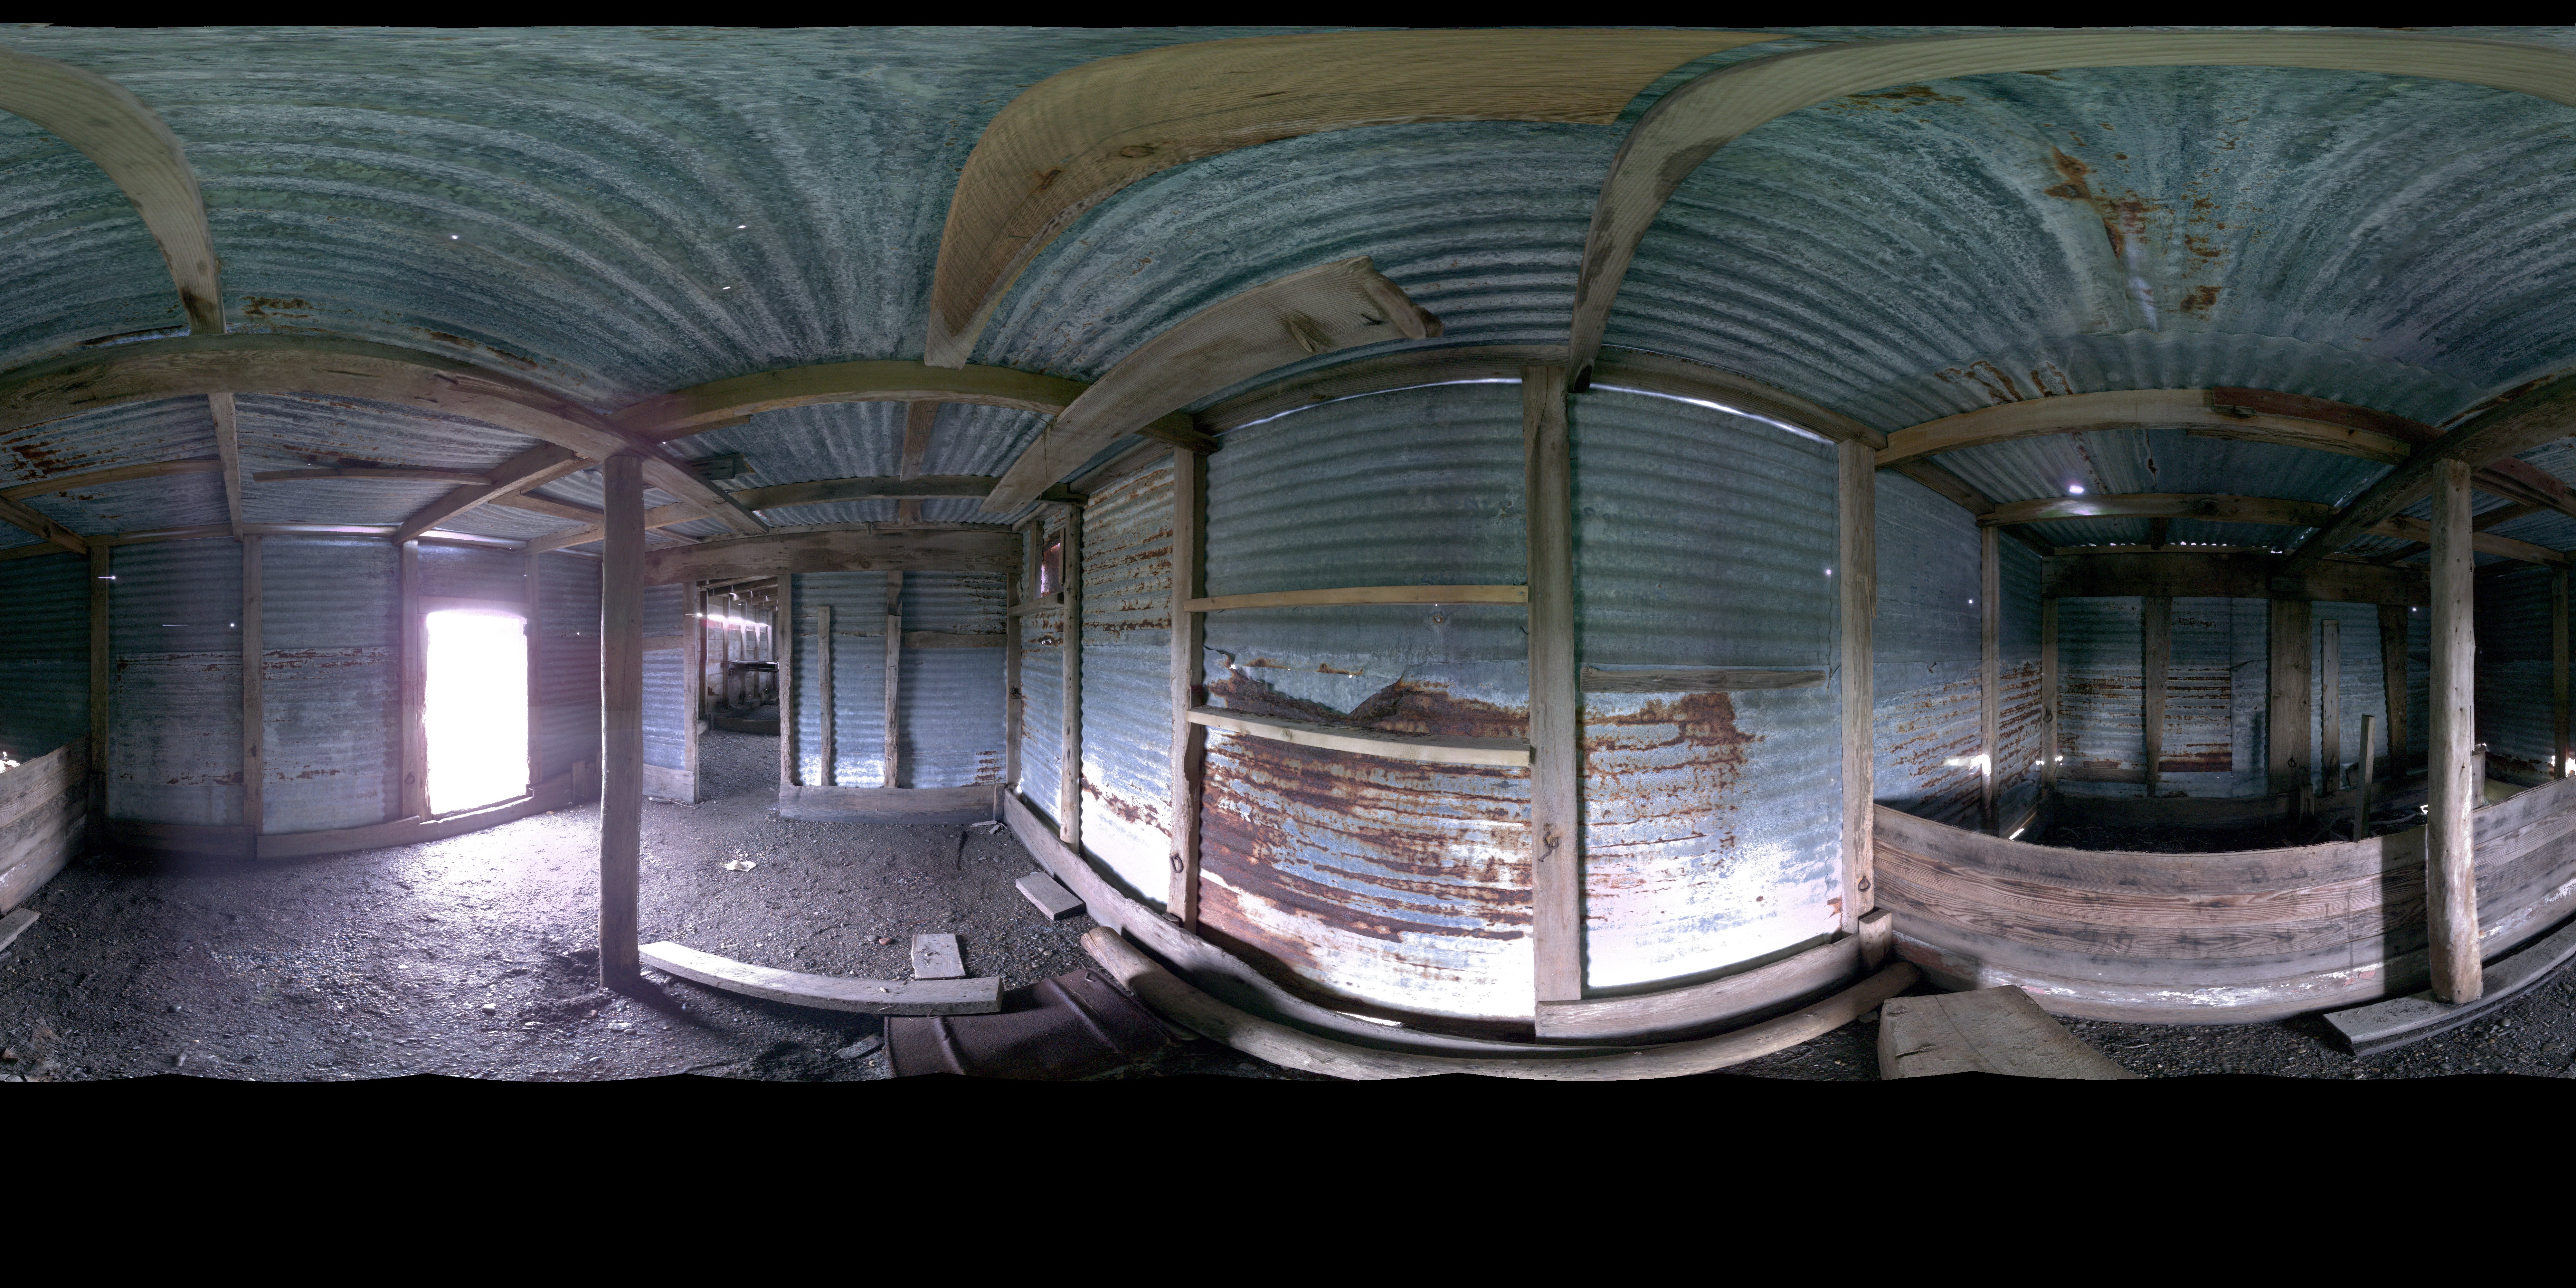 Panoramic view of the RCMP Dog Kennels and Run from the Leica BKL 360, scanning location 7.